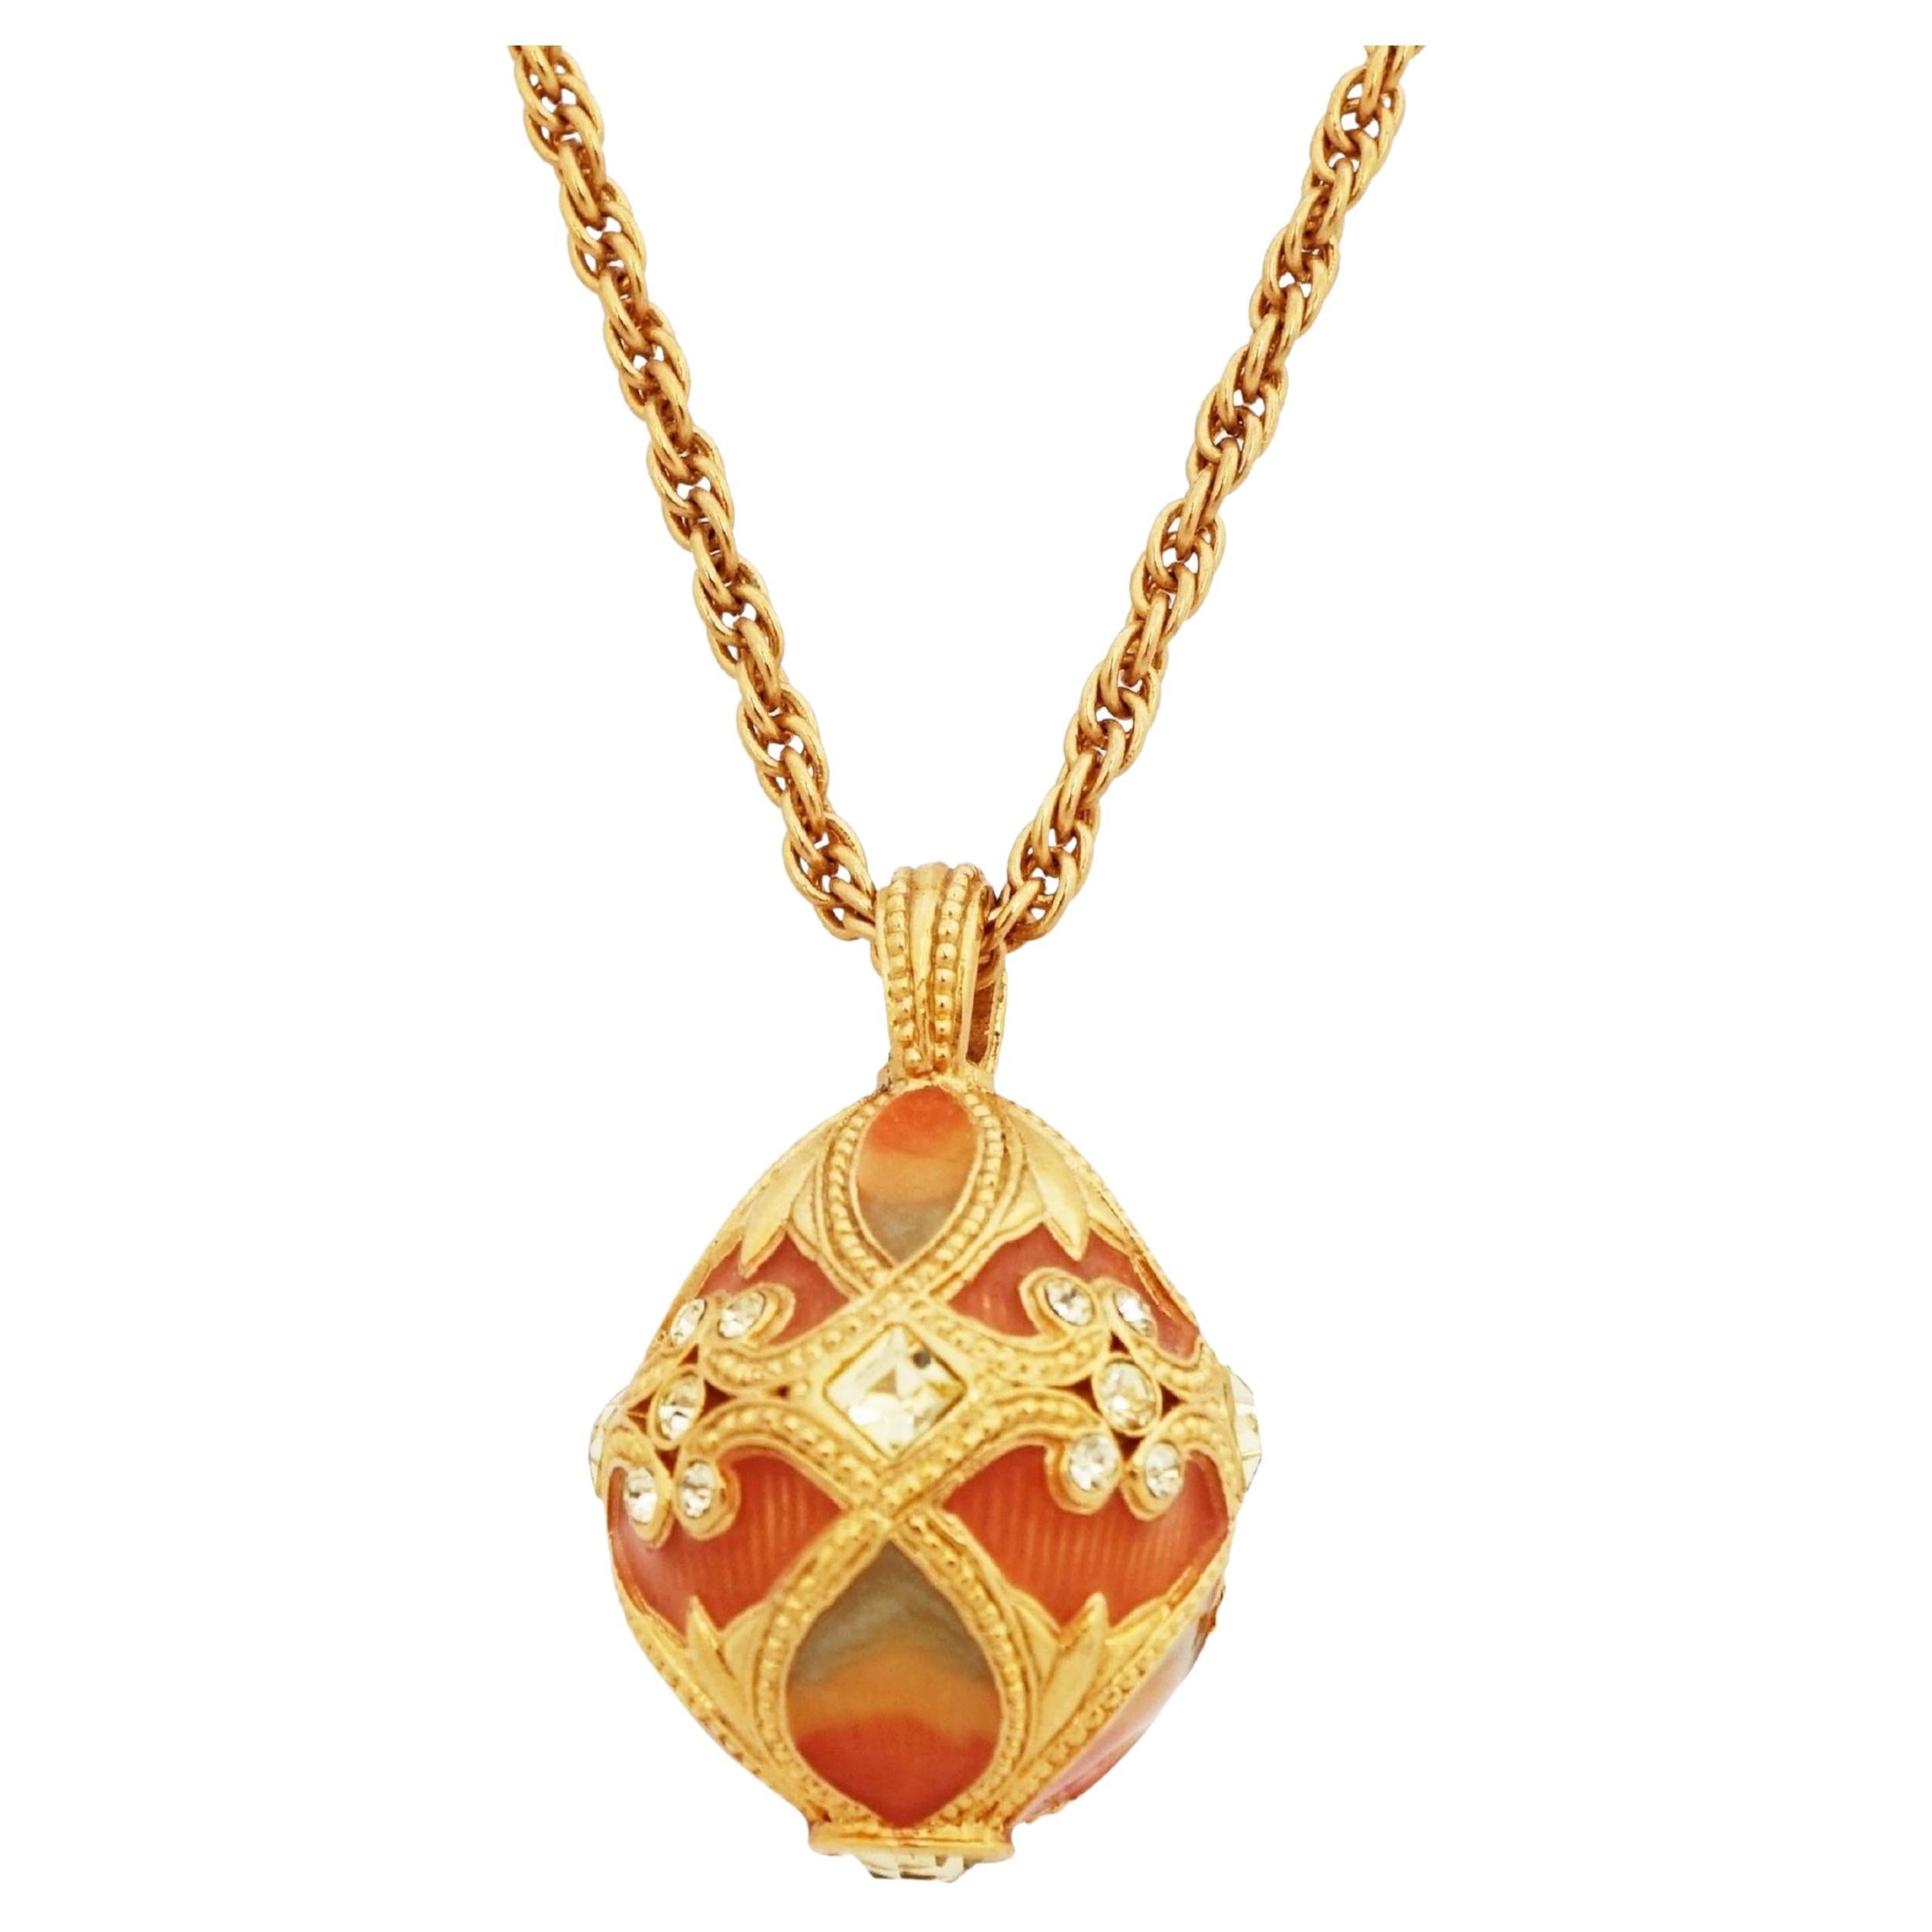 Enameled Egg Pendant Necklace With Rhinestone Accents By Joan Rivers, 1990s For Sale